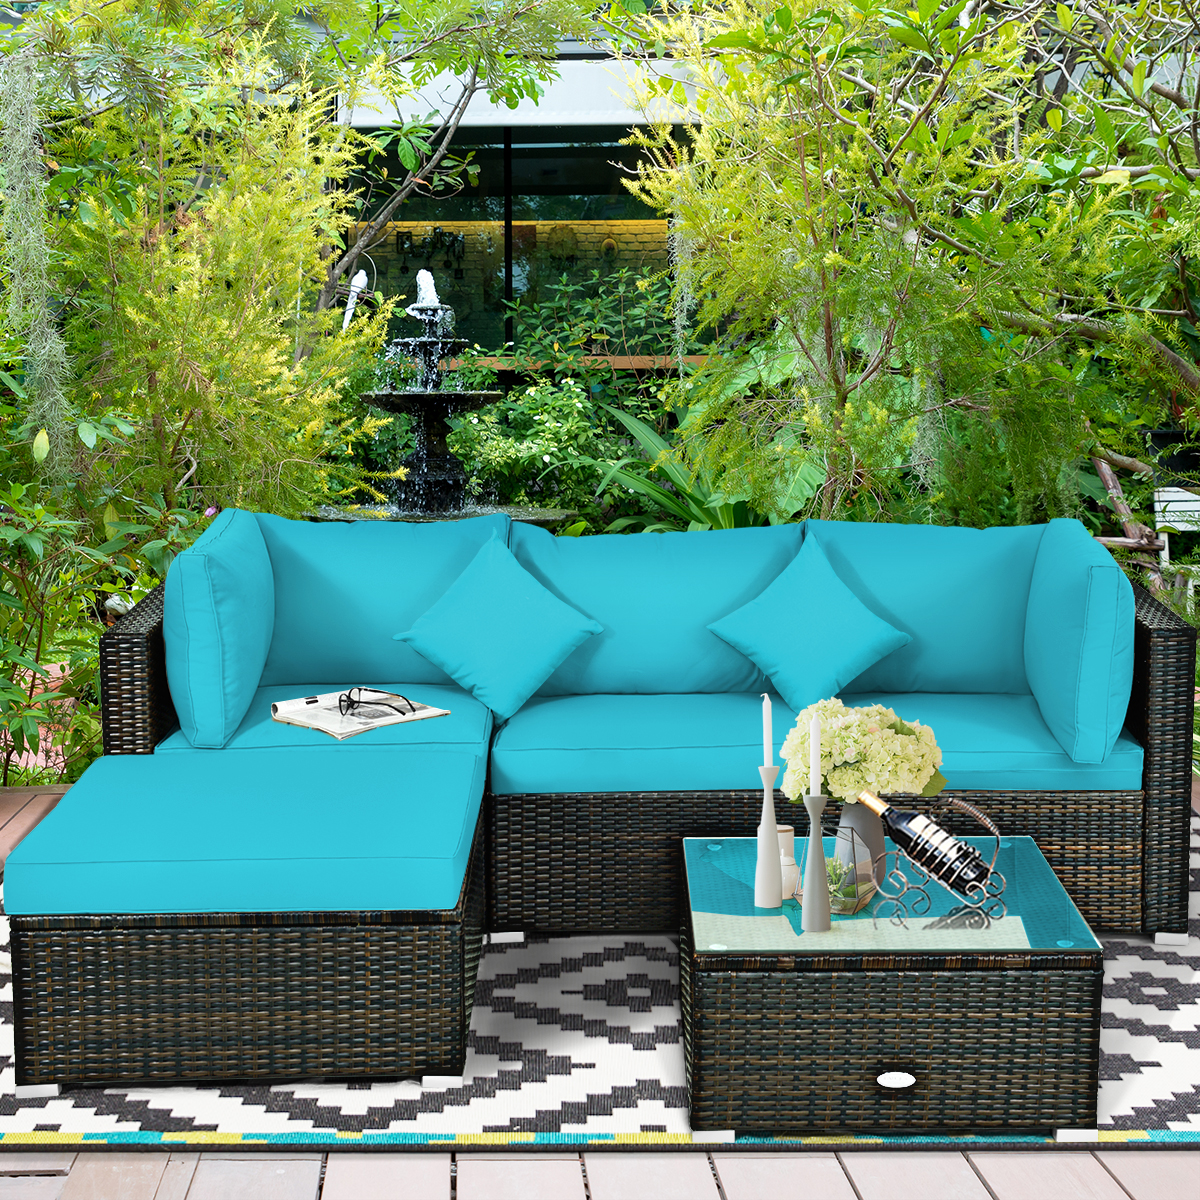 Patiojoy 8-Piece Outdoor Rattan Sectional Loveseat Couch Conversation Sofa Set with Storage Box &Coffee Table Turquoise - image 3 of 6